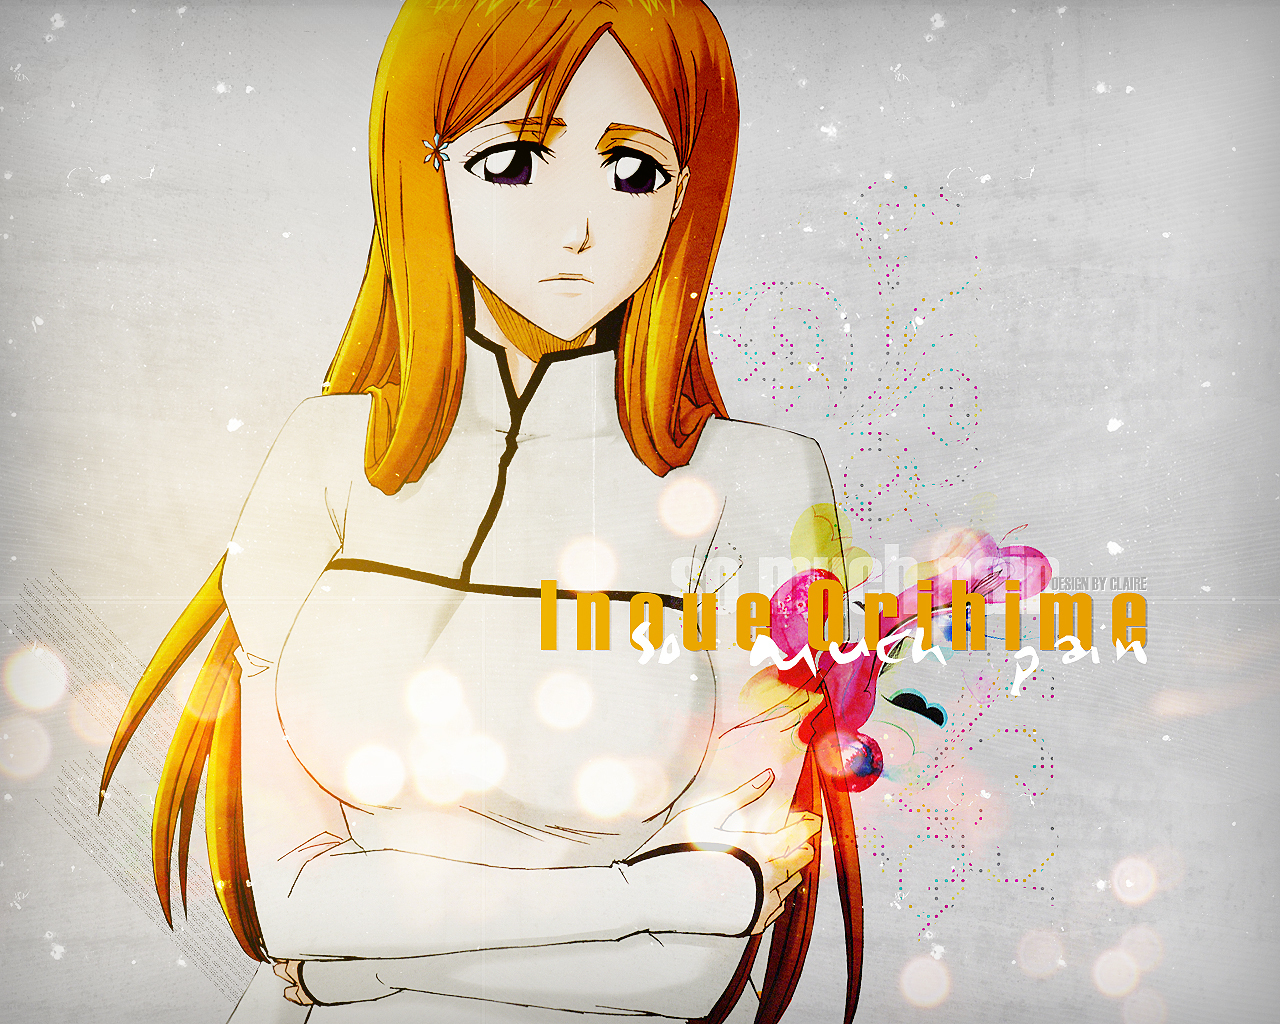 Bleach Anime Image Orihime HD Wallpaper And Background Photos